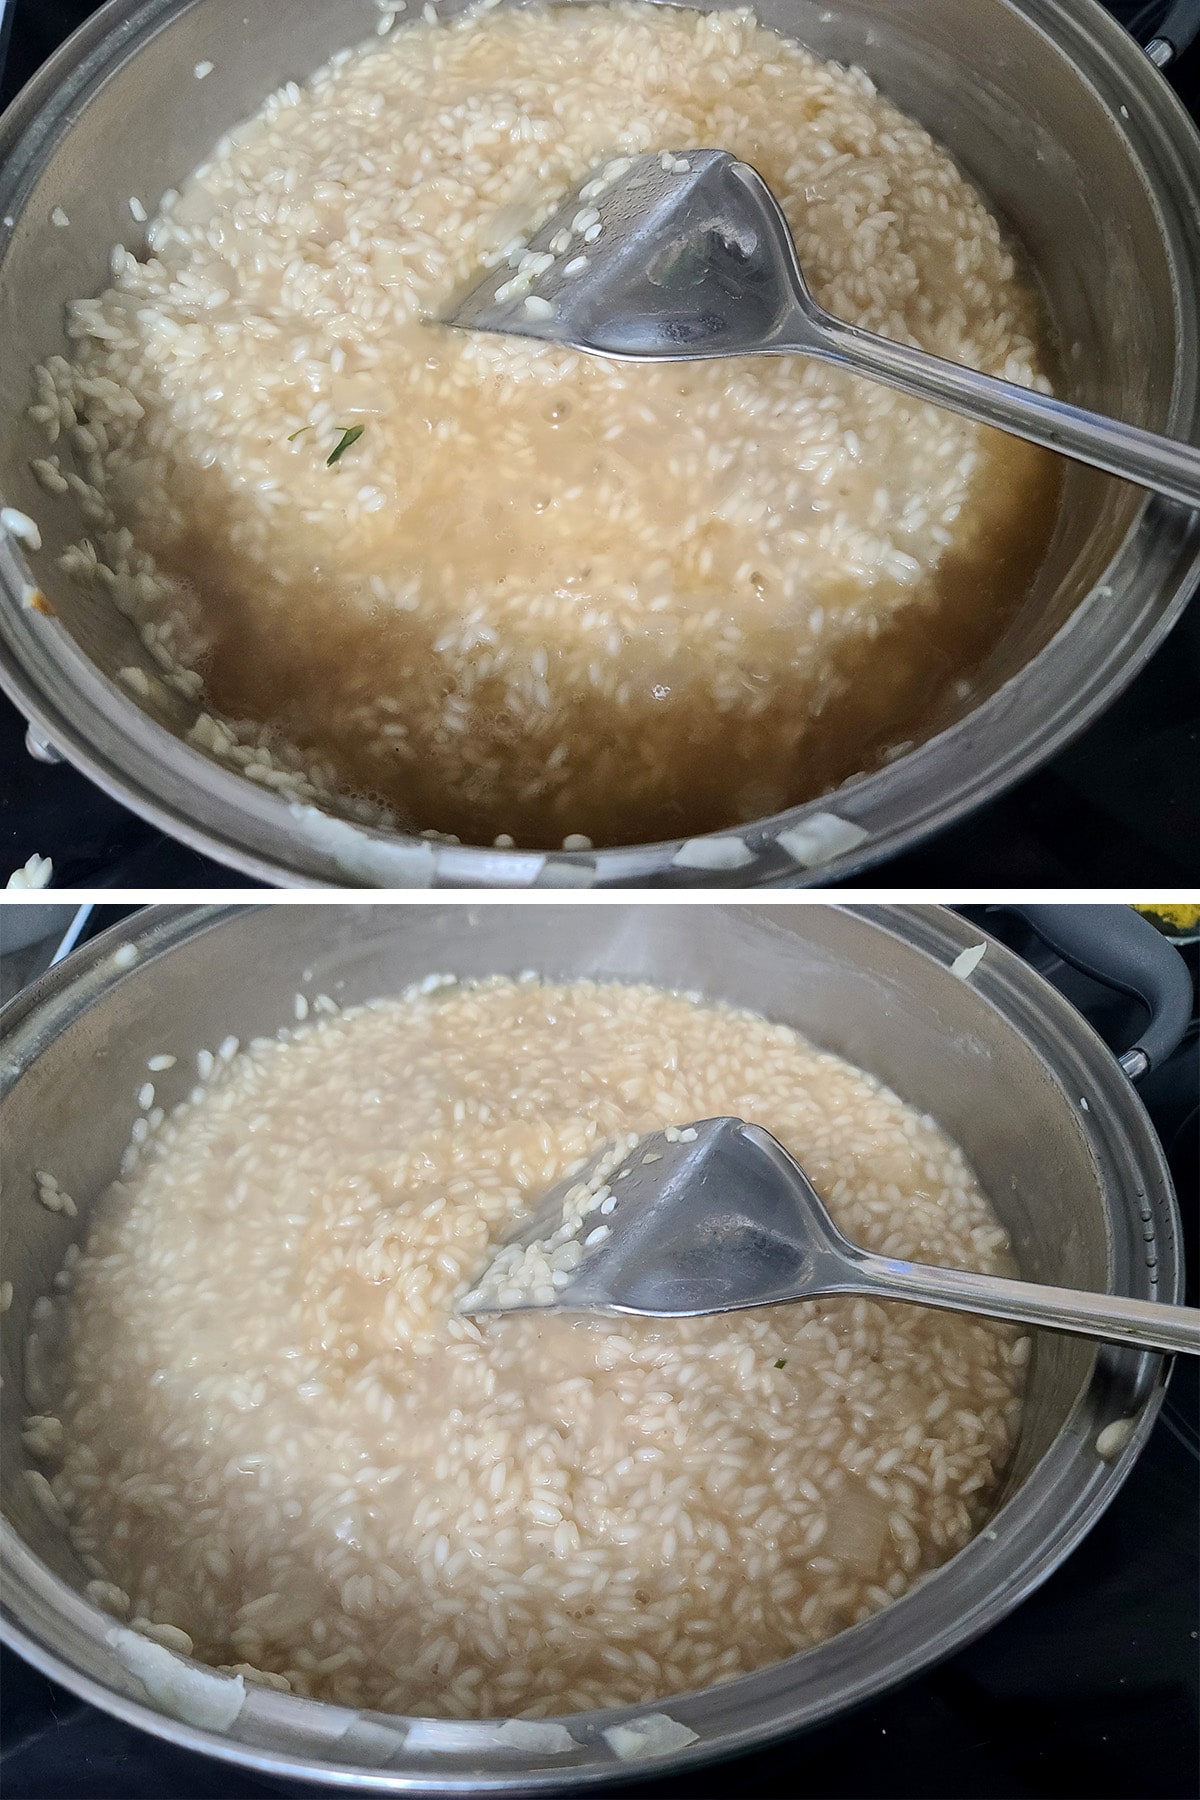 Rice and broth in a large metal pan, being stirred.